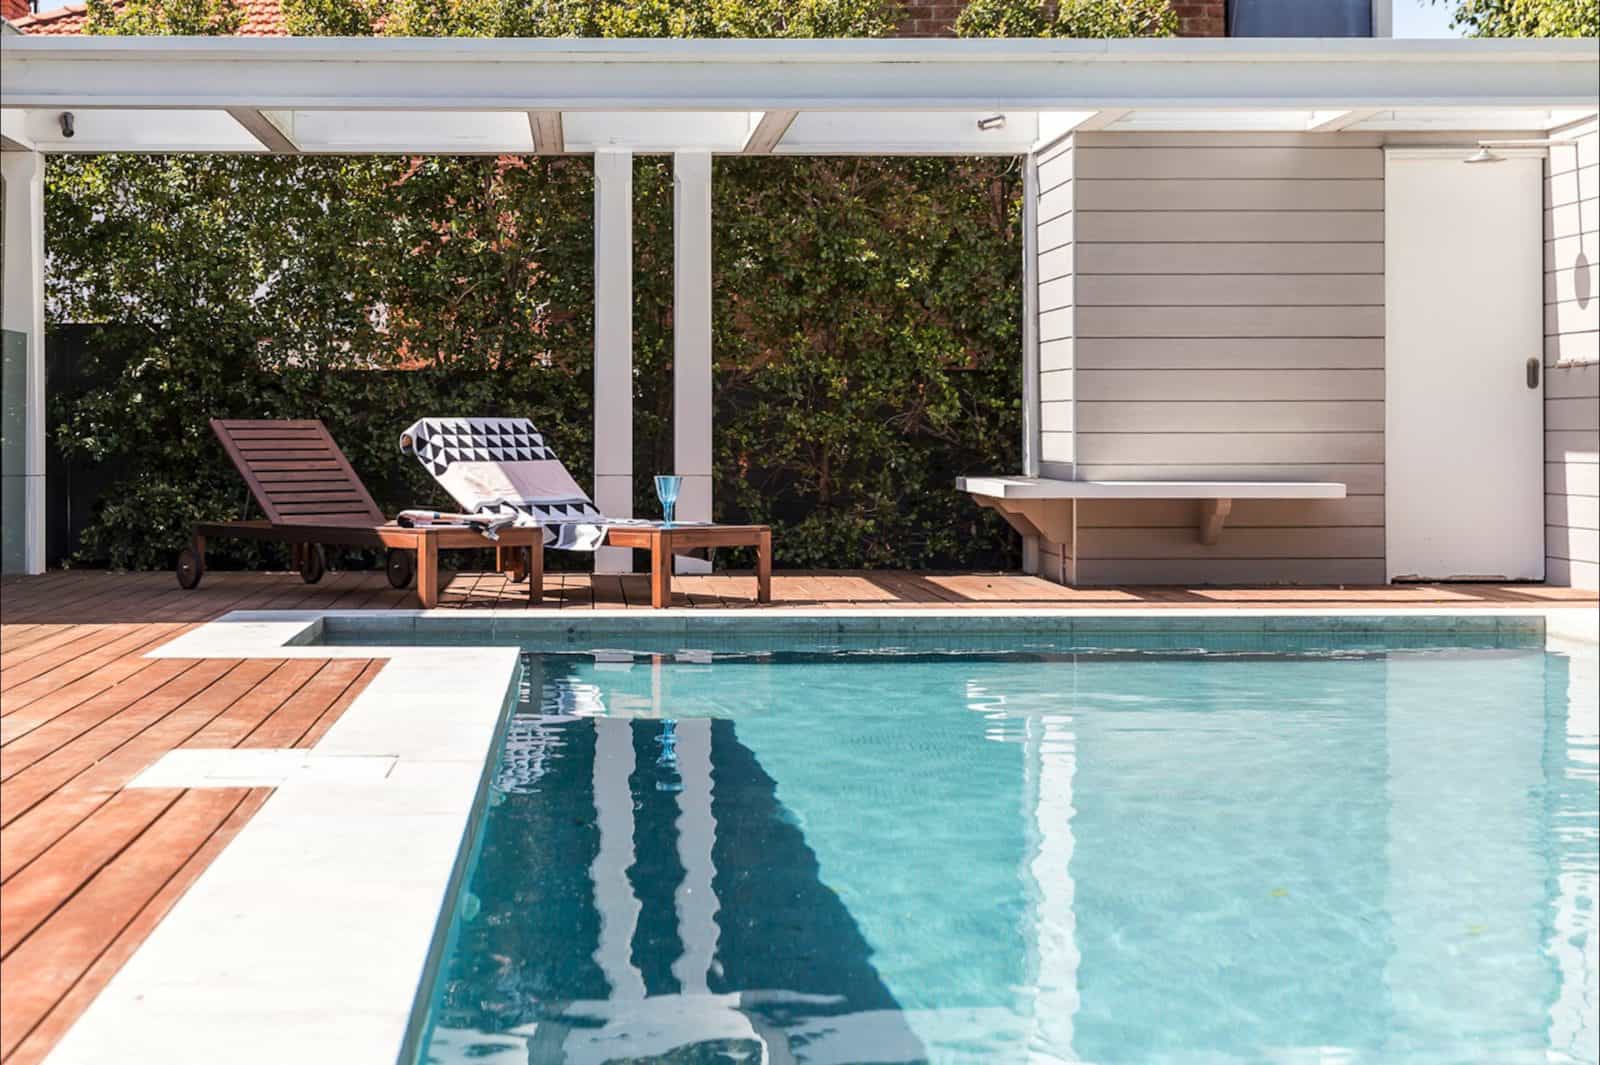 You'll love the shimmering outdoor pool